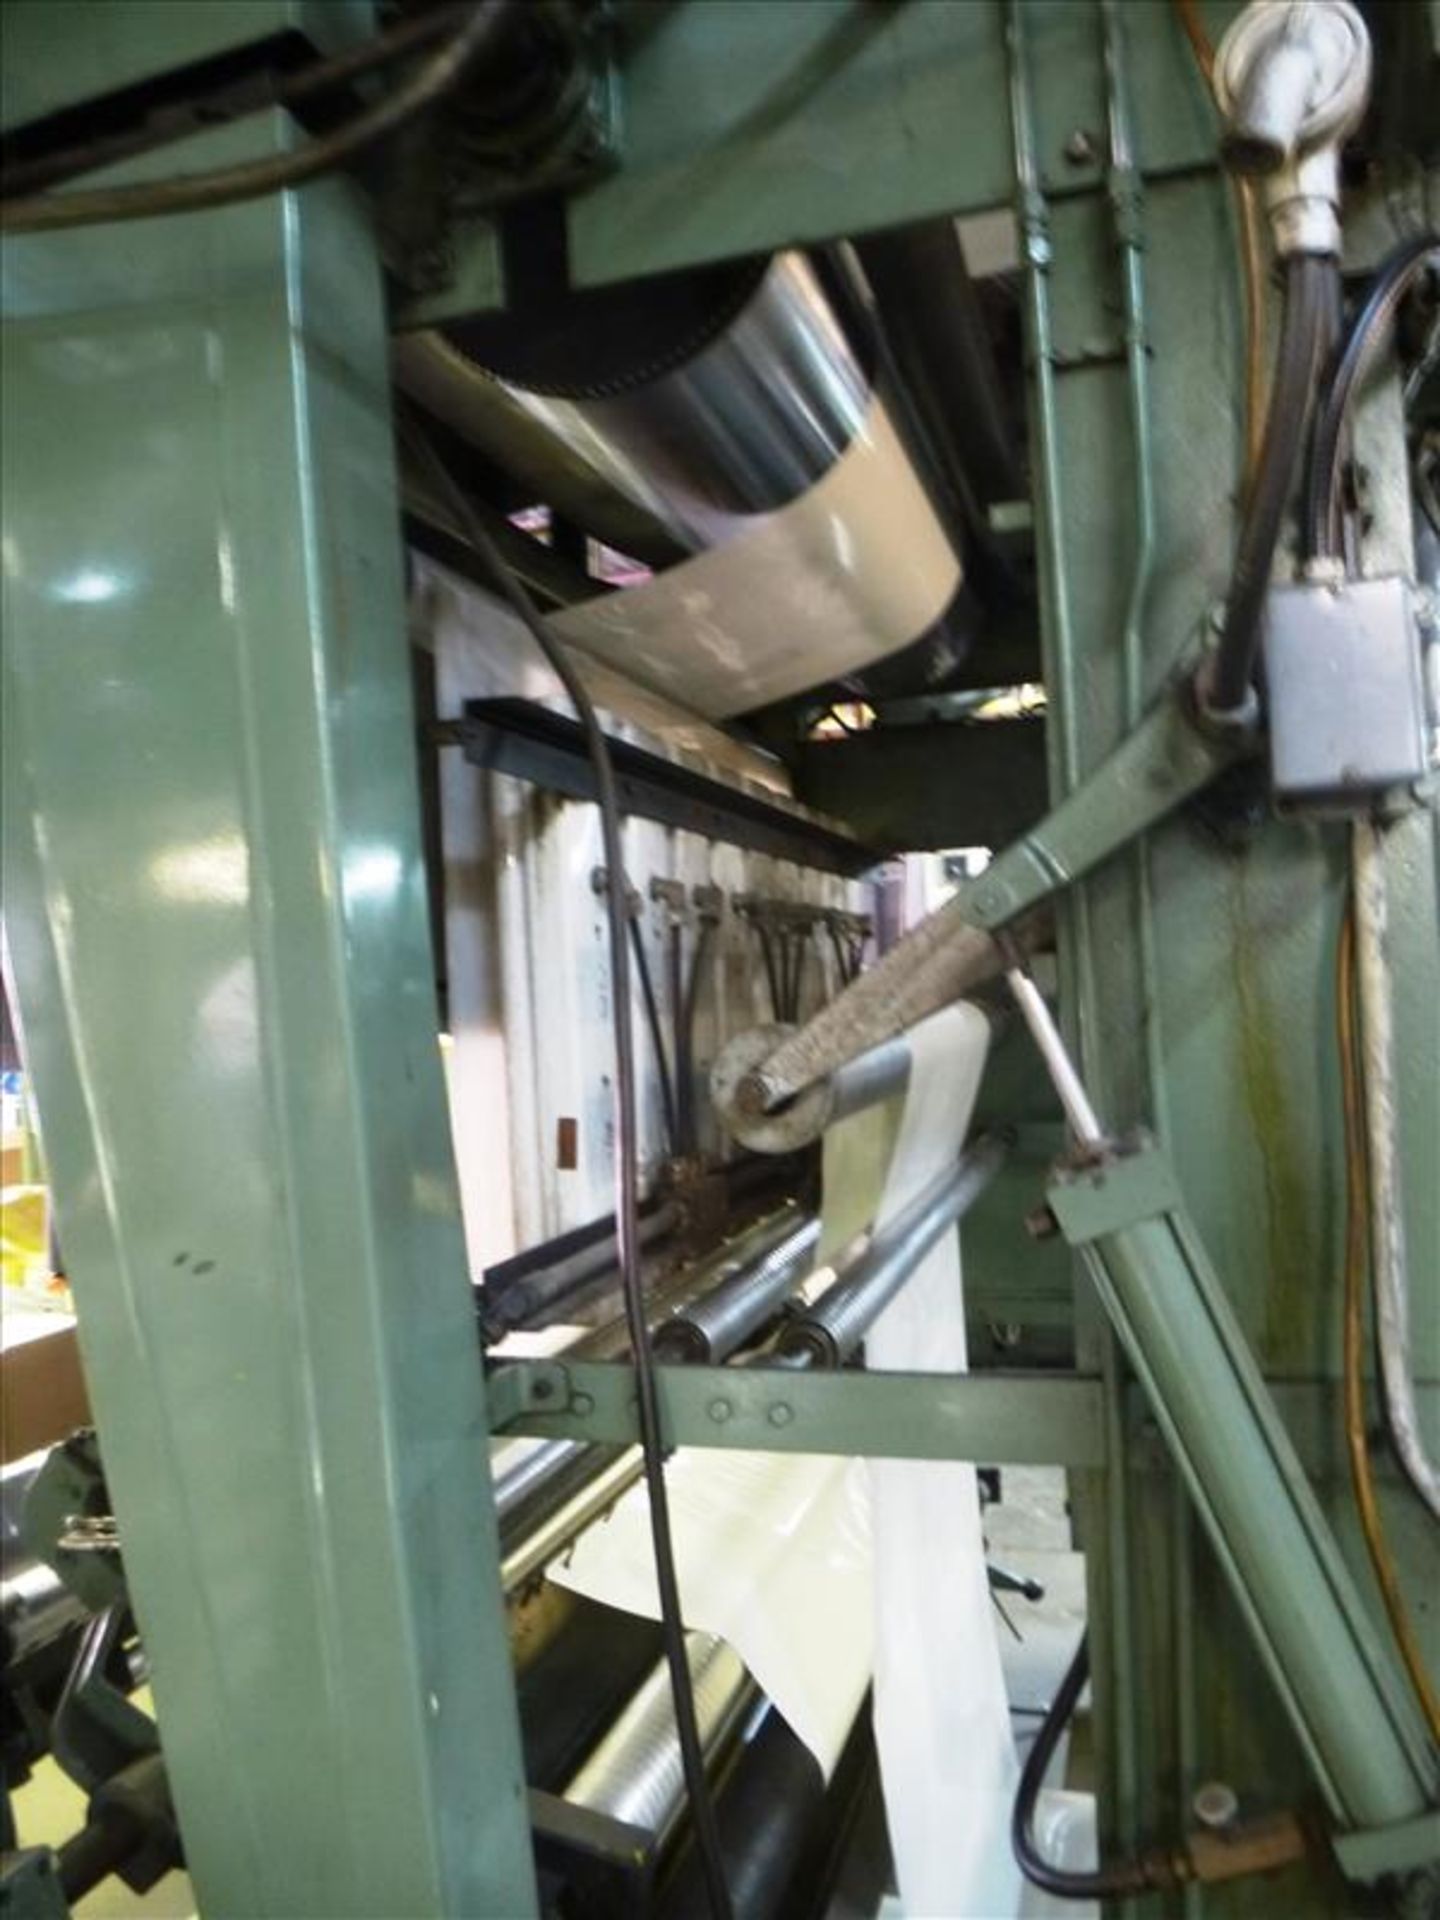 PCMC (Paper Converting Machine Co.) 6-colour central impression flexographic printing press, 56" - Image 14 of 30